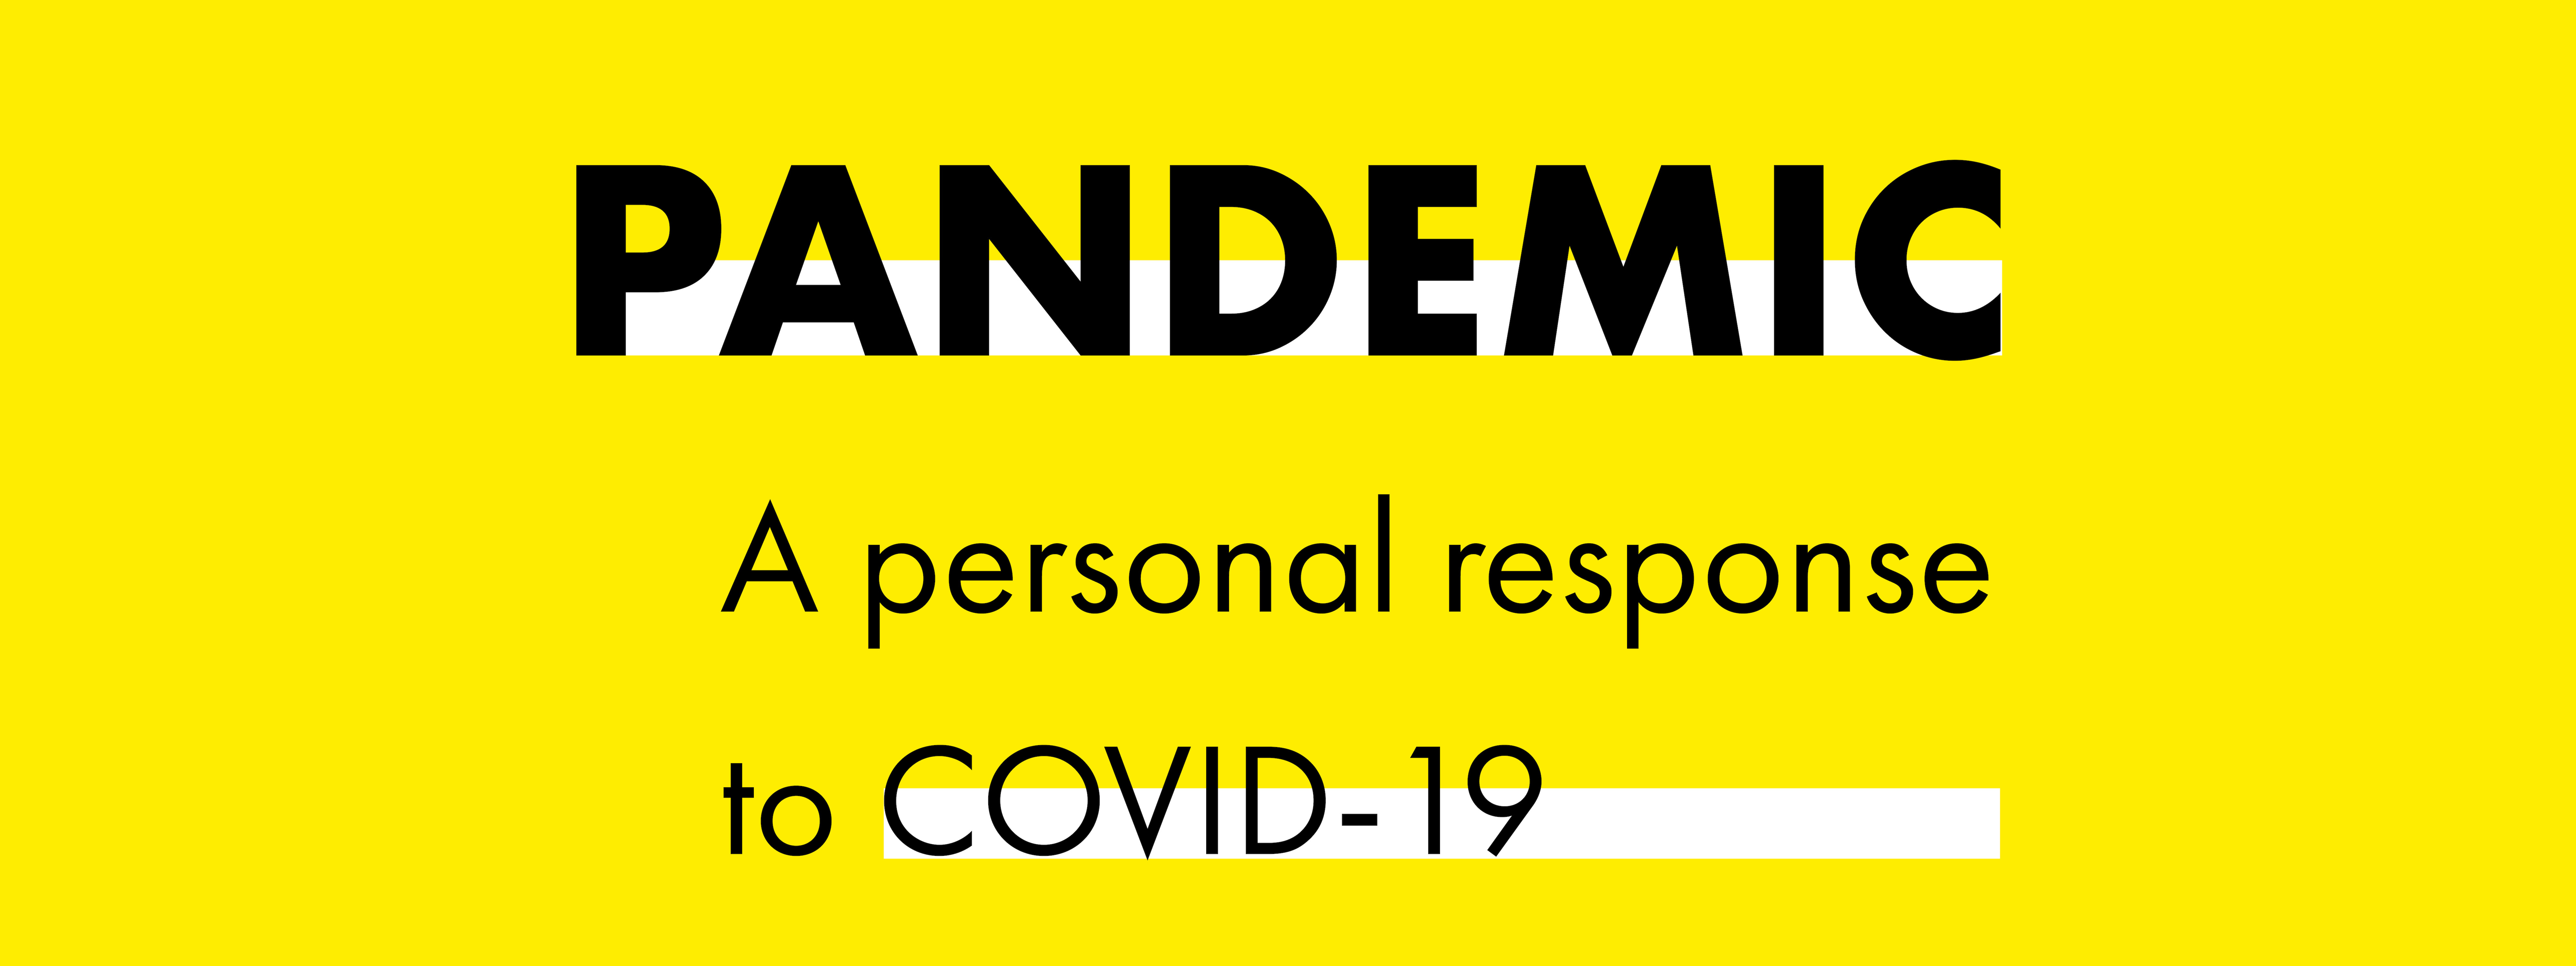 pandemic-a-personal-response-to-covid-19-an-lanntair